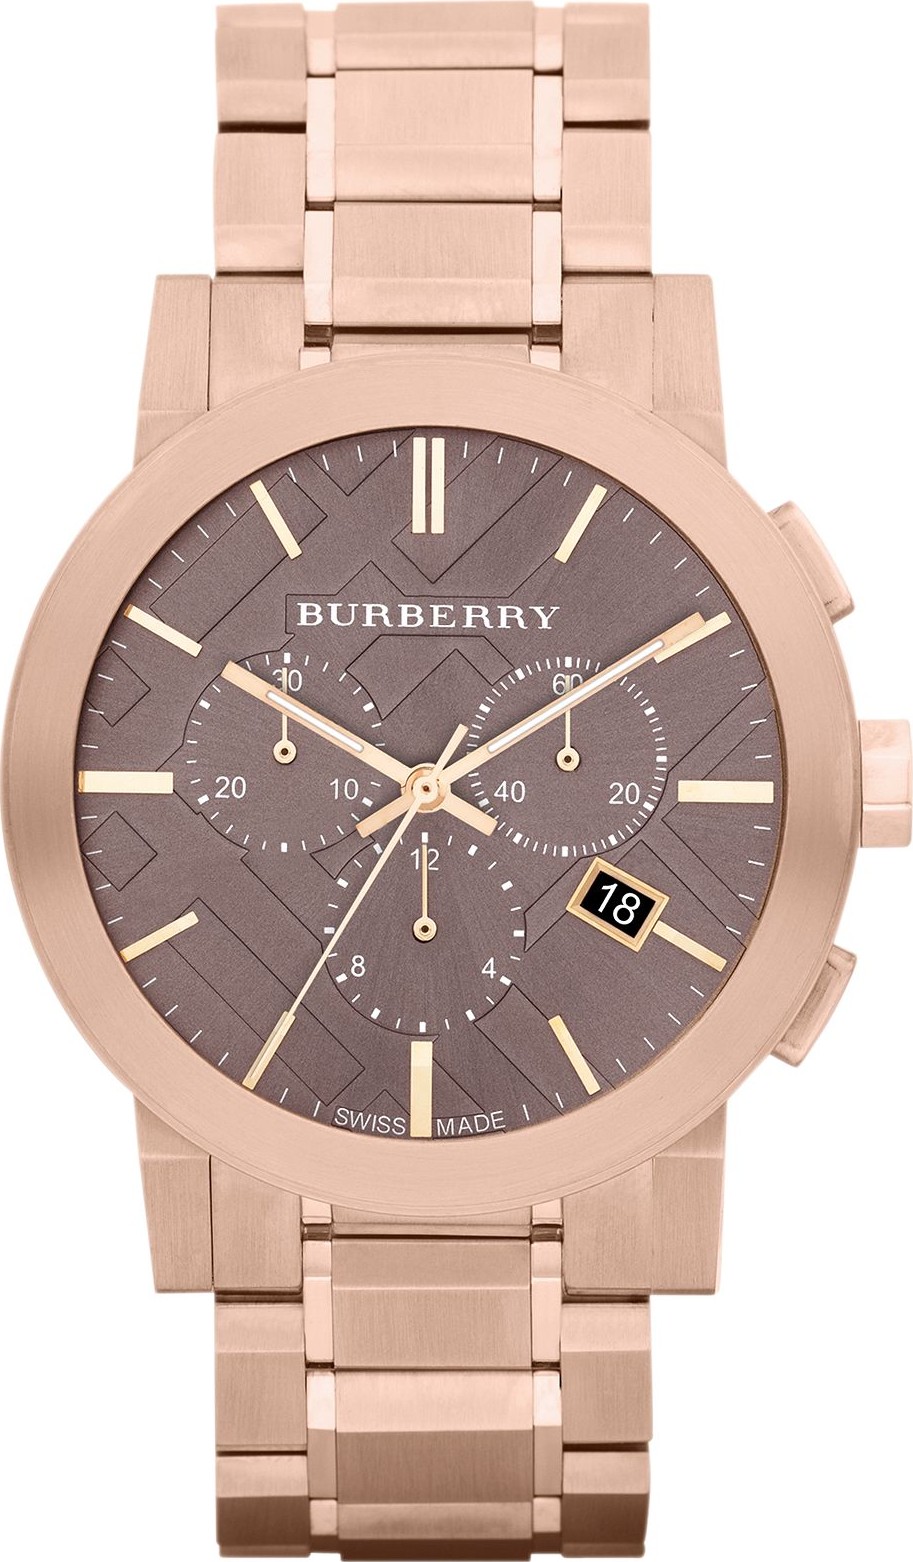 dong ho burberry sale off 20%